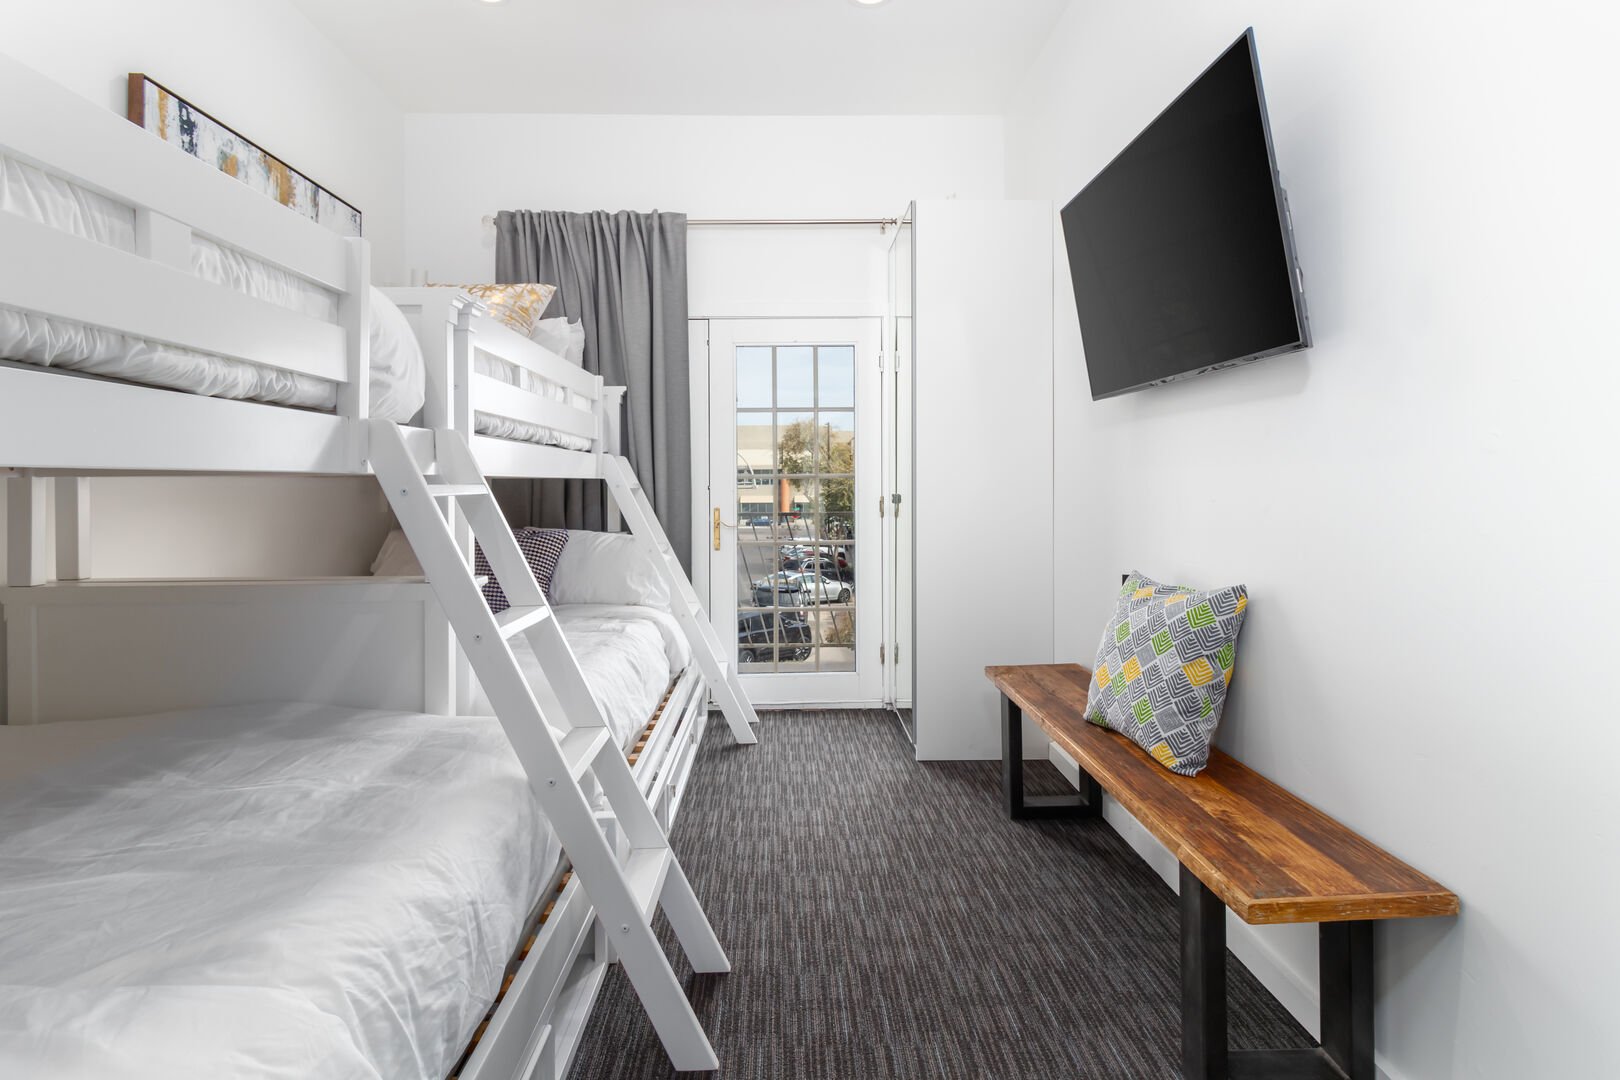 Two Bunk Beds Featured in Bedroom of Luxury Vacation Rental in Scottsdale.